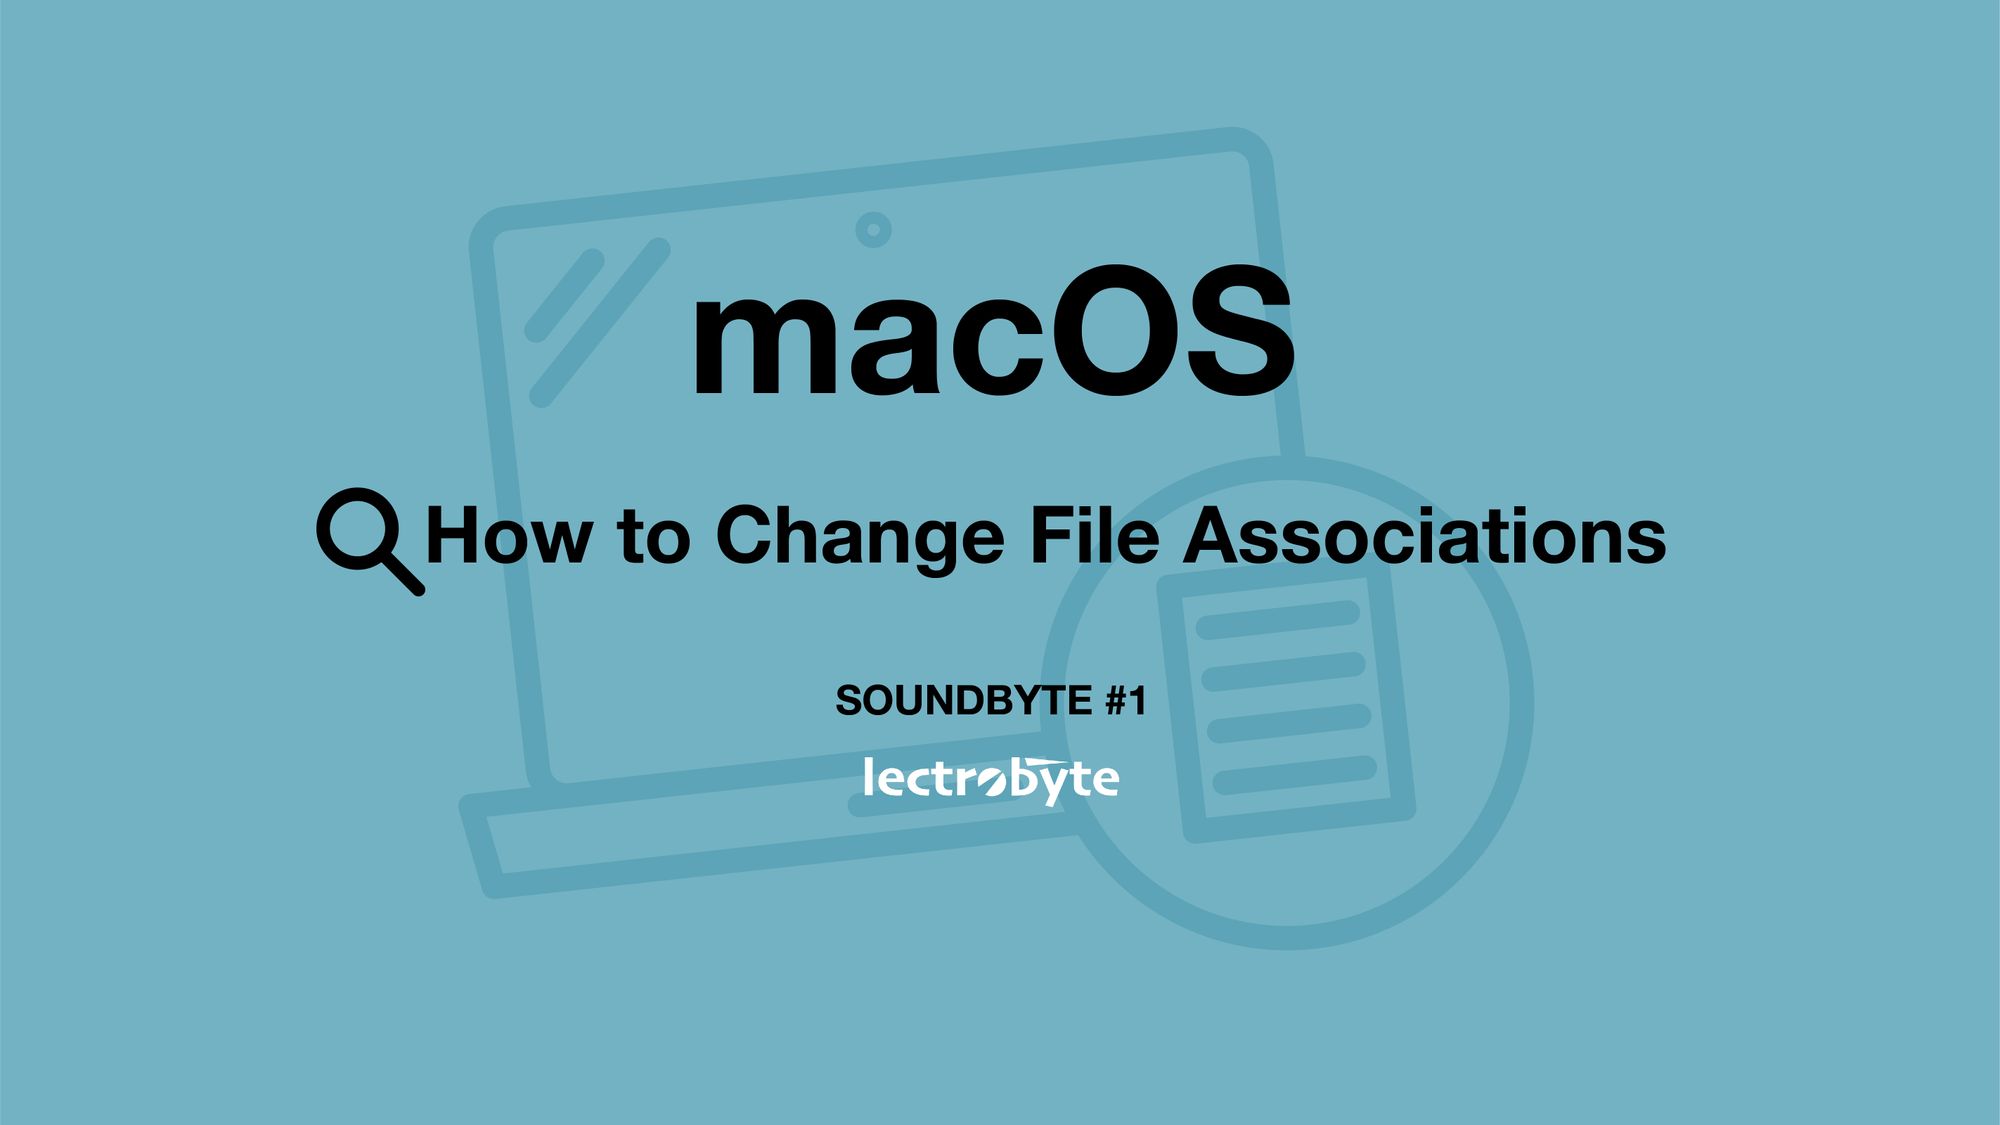 macOS - How to Change File Associations